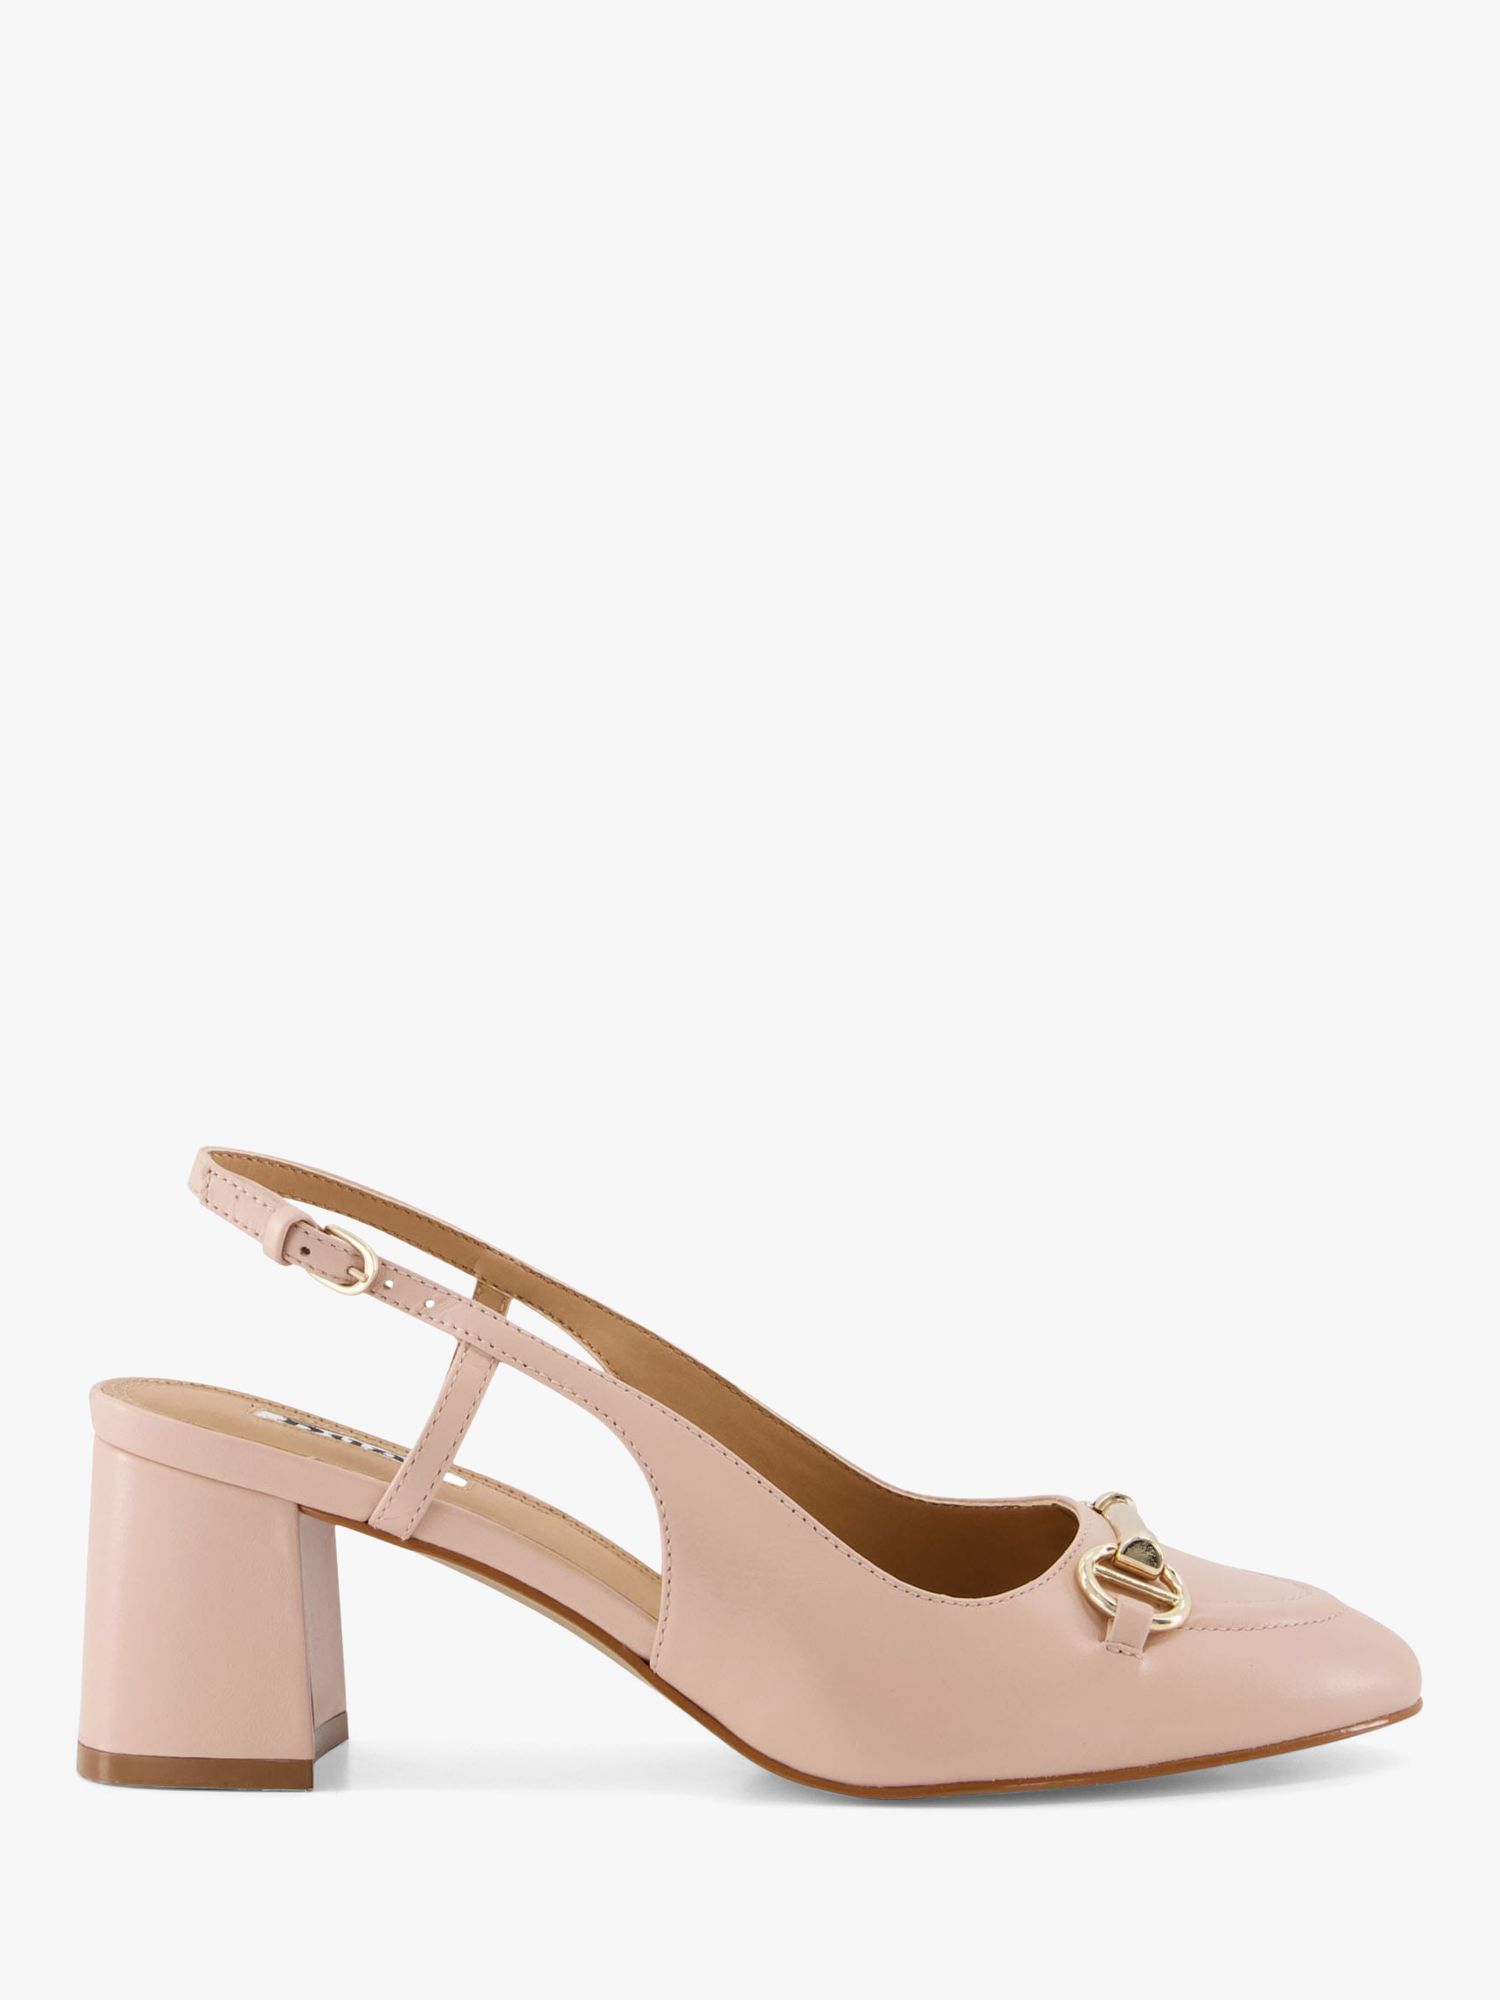 Dune Cassie Leather Slingback Court Shoes, Nude at John Lewis & Partners